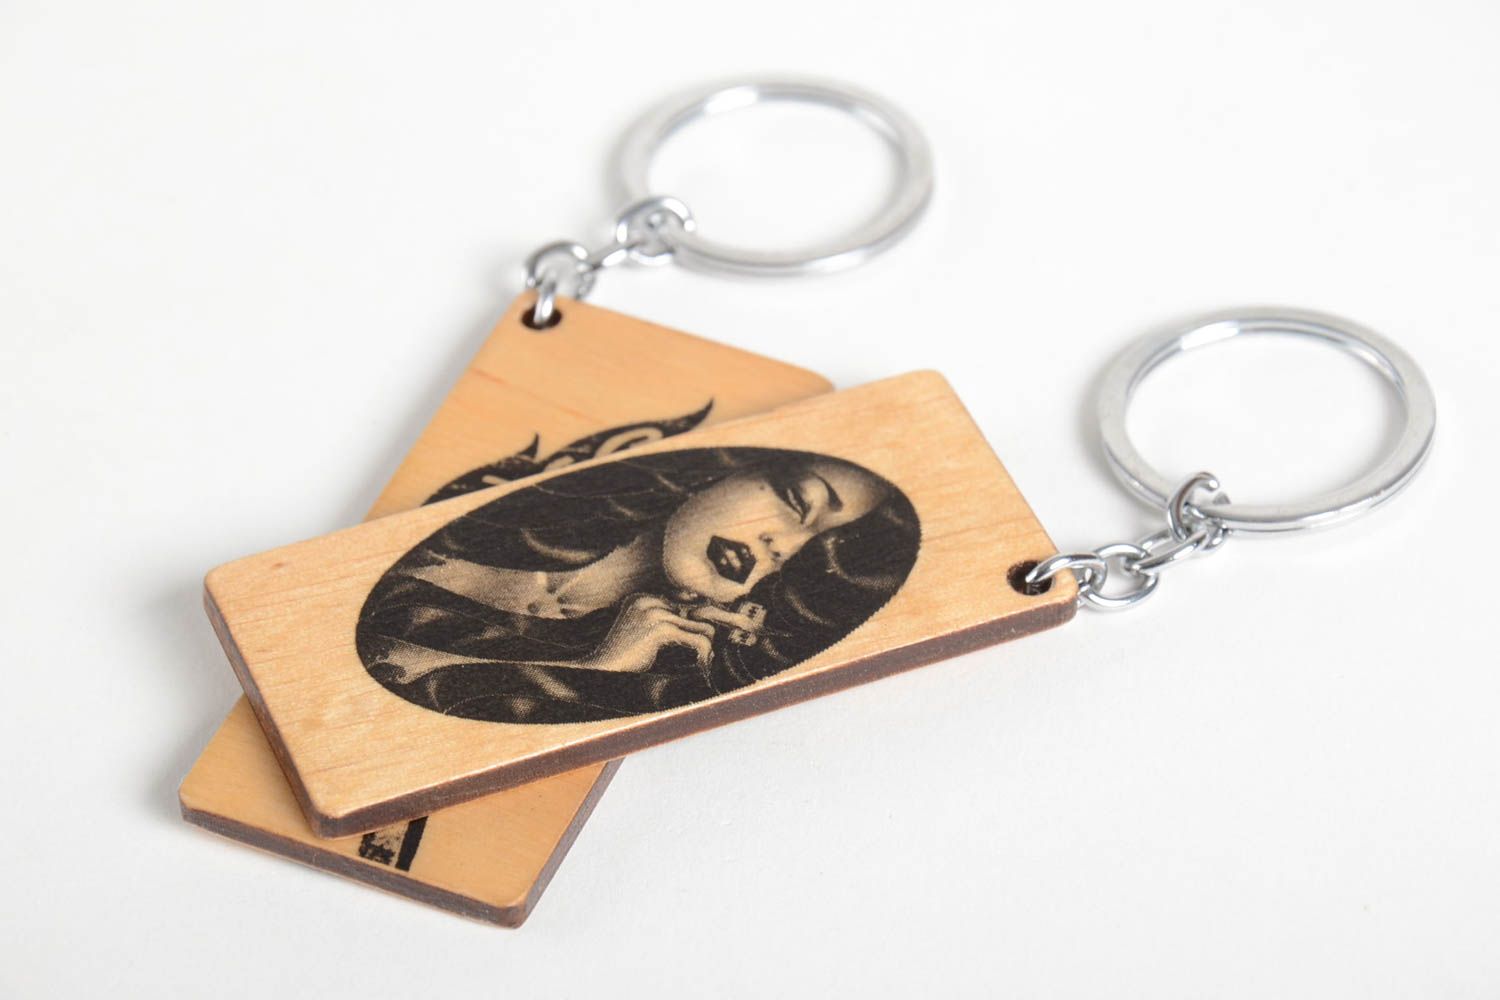 Handmade wooden keychains designer keyrings 2 key chains wooden gifts photo 2